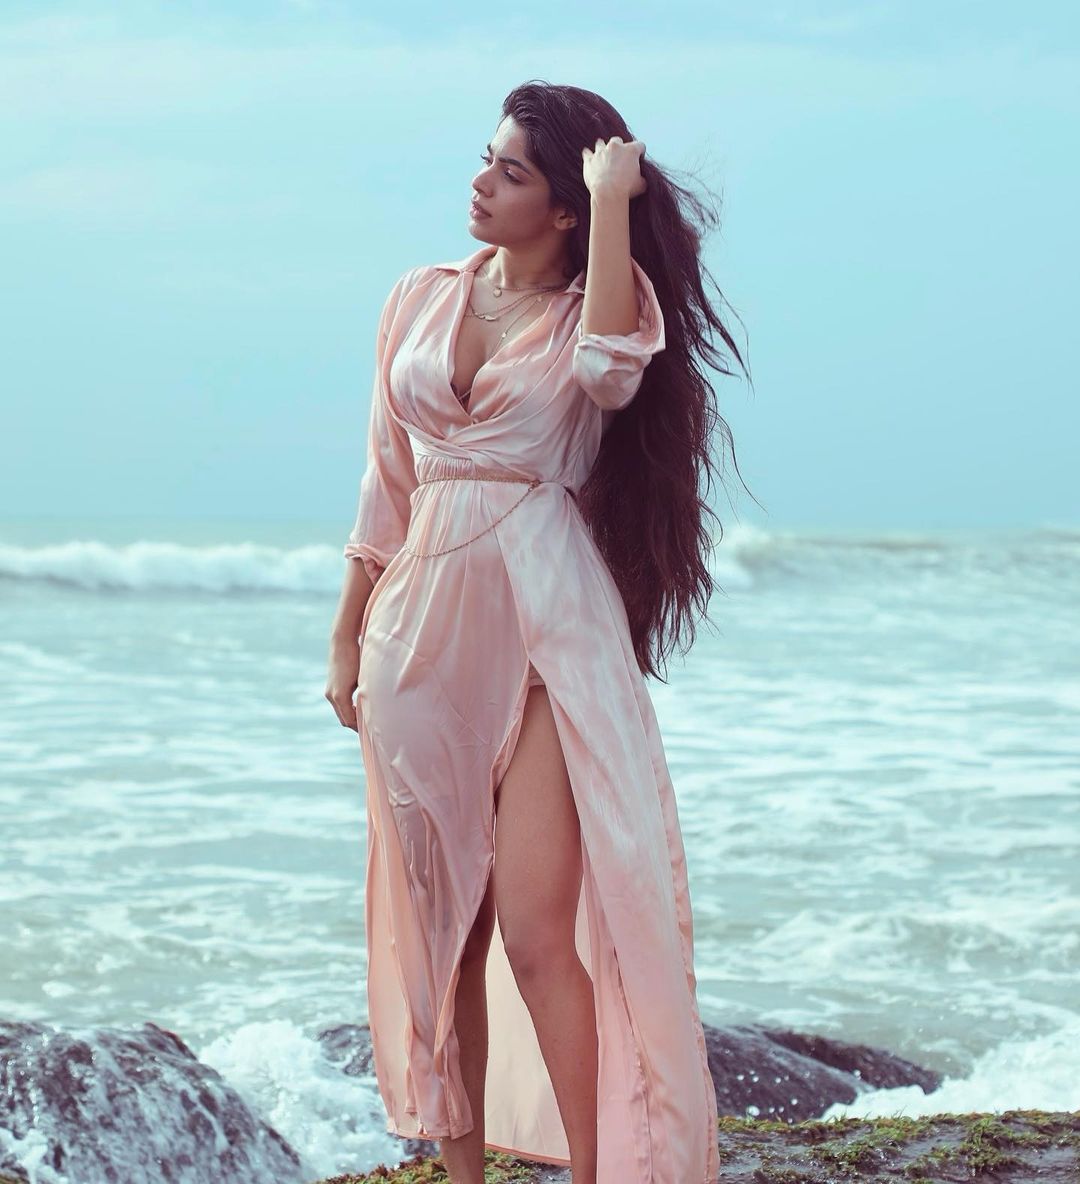 On the beach... Hot Pose.. Photos posted by young Tamil actress on Insta!